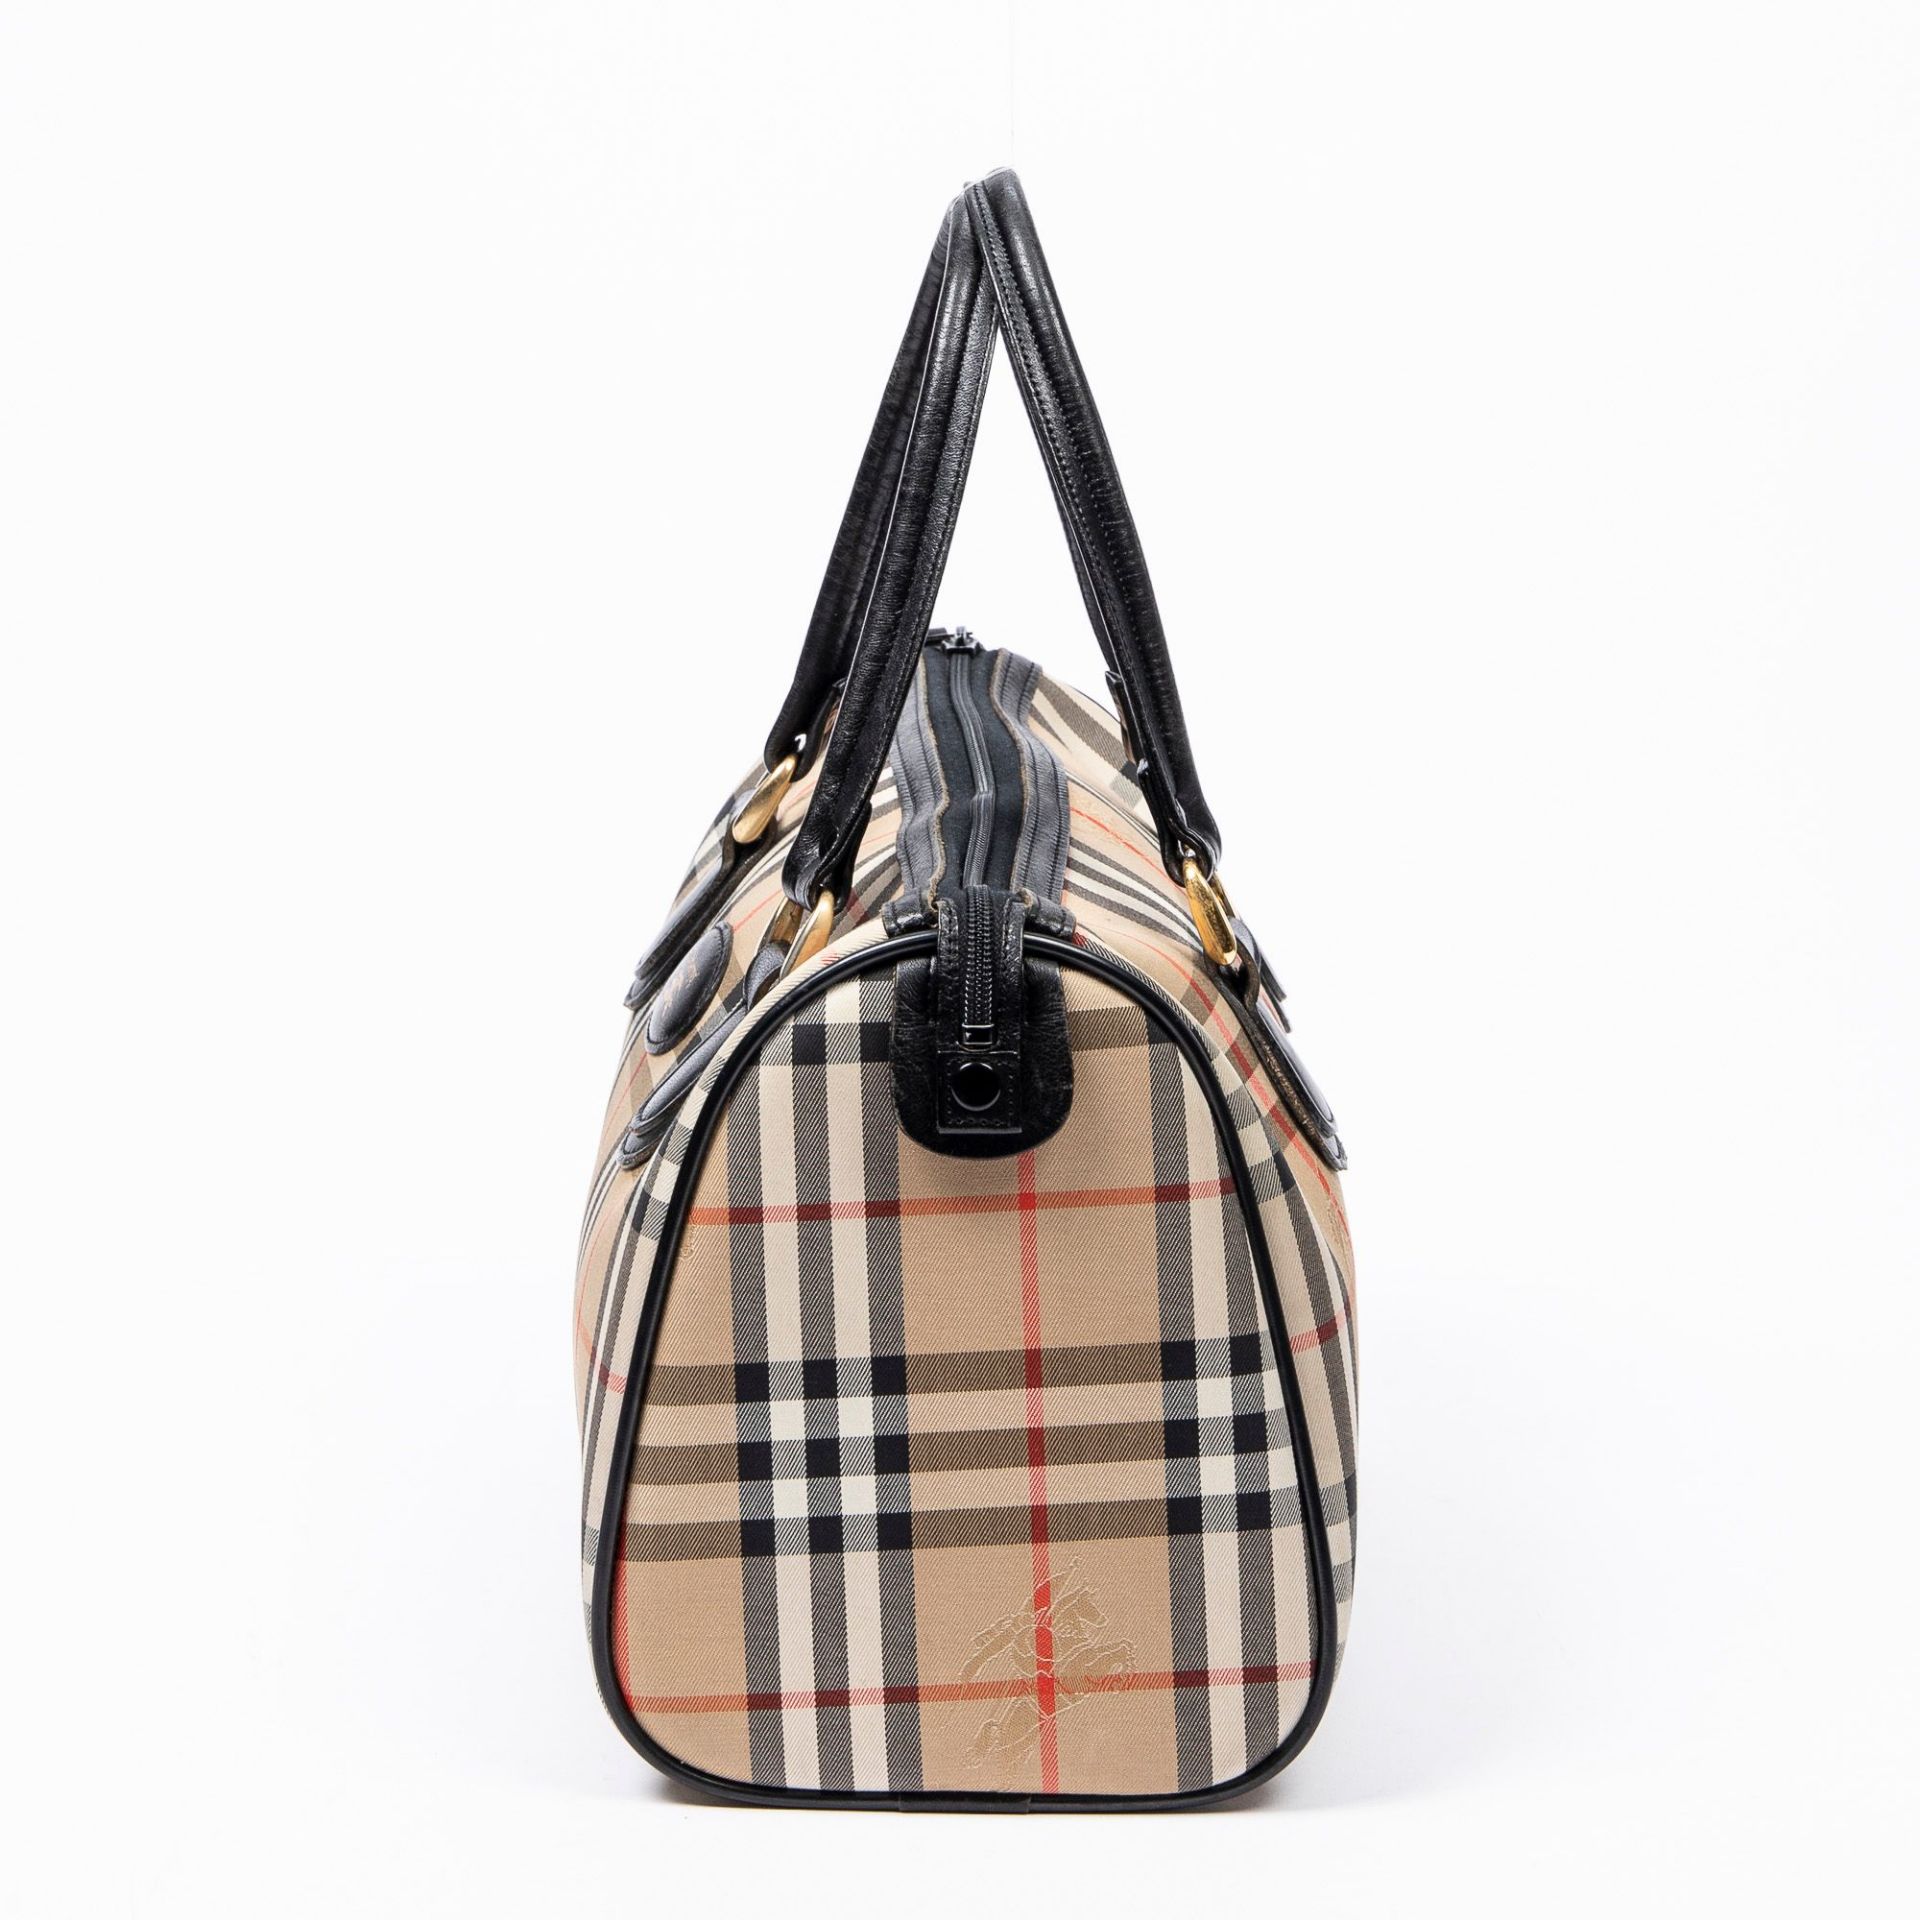 RRP £890 Burberry Rare Vintage Burberry's Boston Bag in Beige/Black AAP8310 Grade AB Please - Image 3 of 4